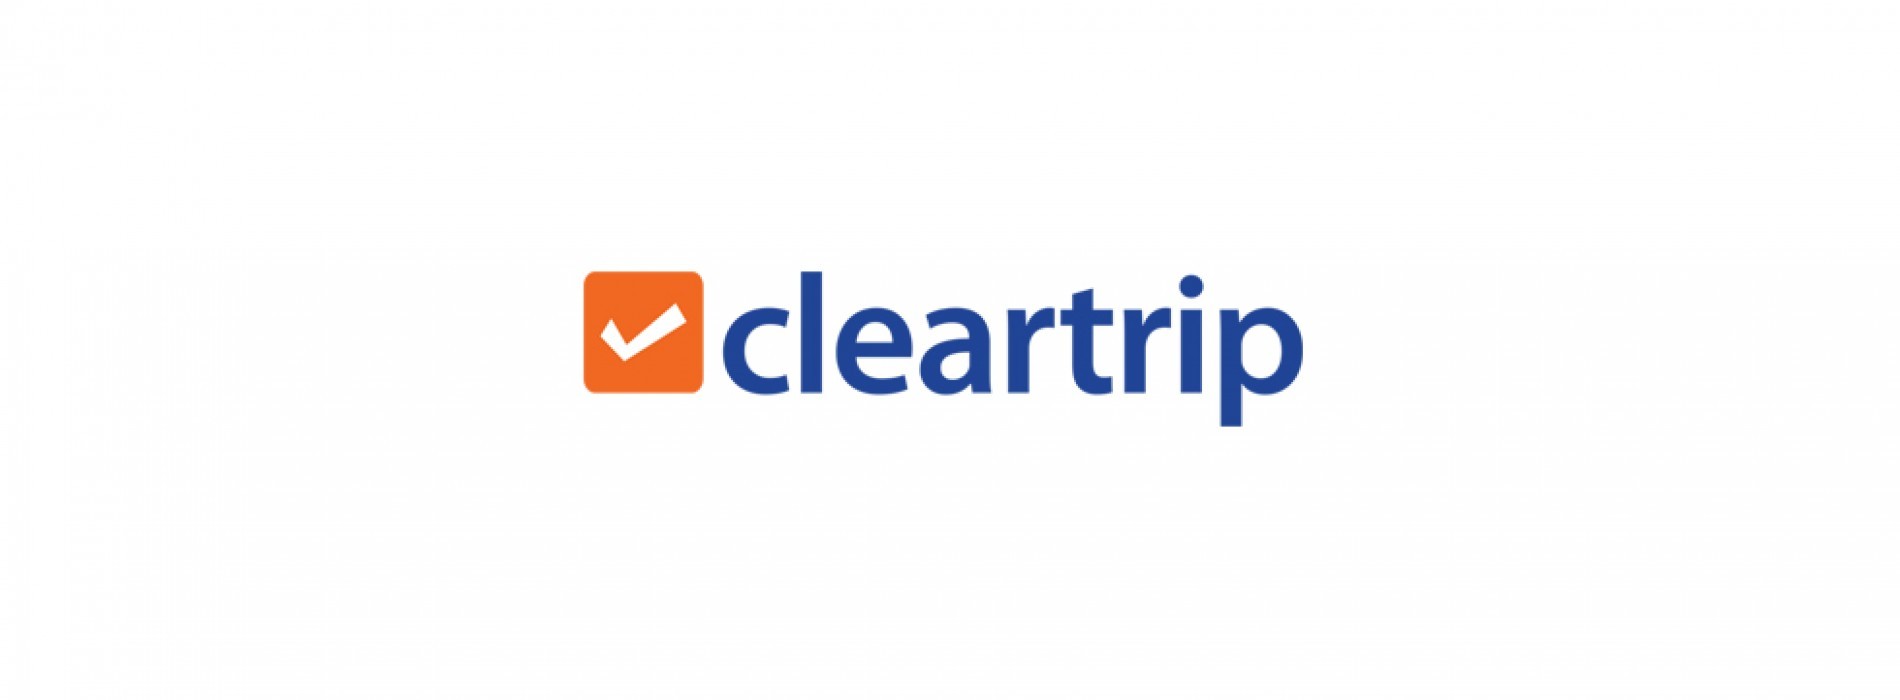 Cleartrip builds Alexa skills for its platform